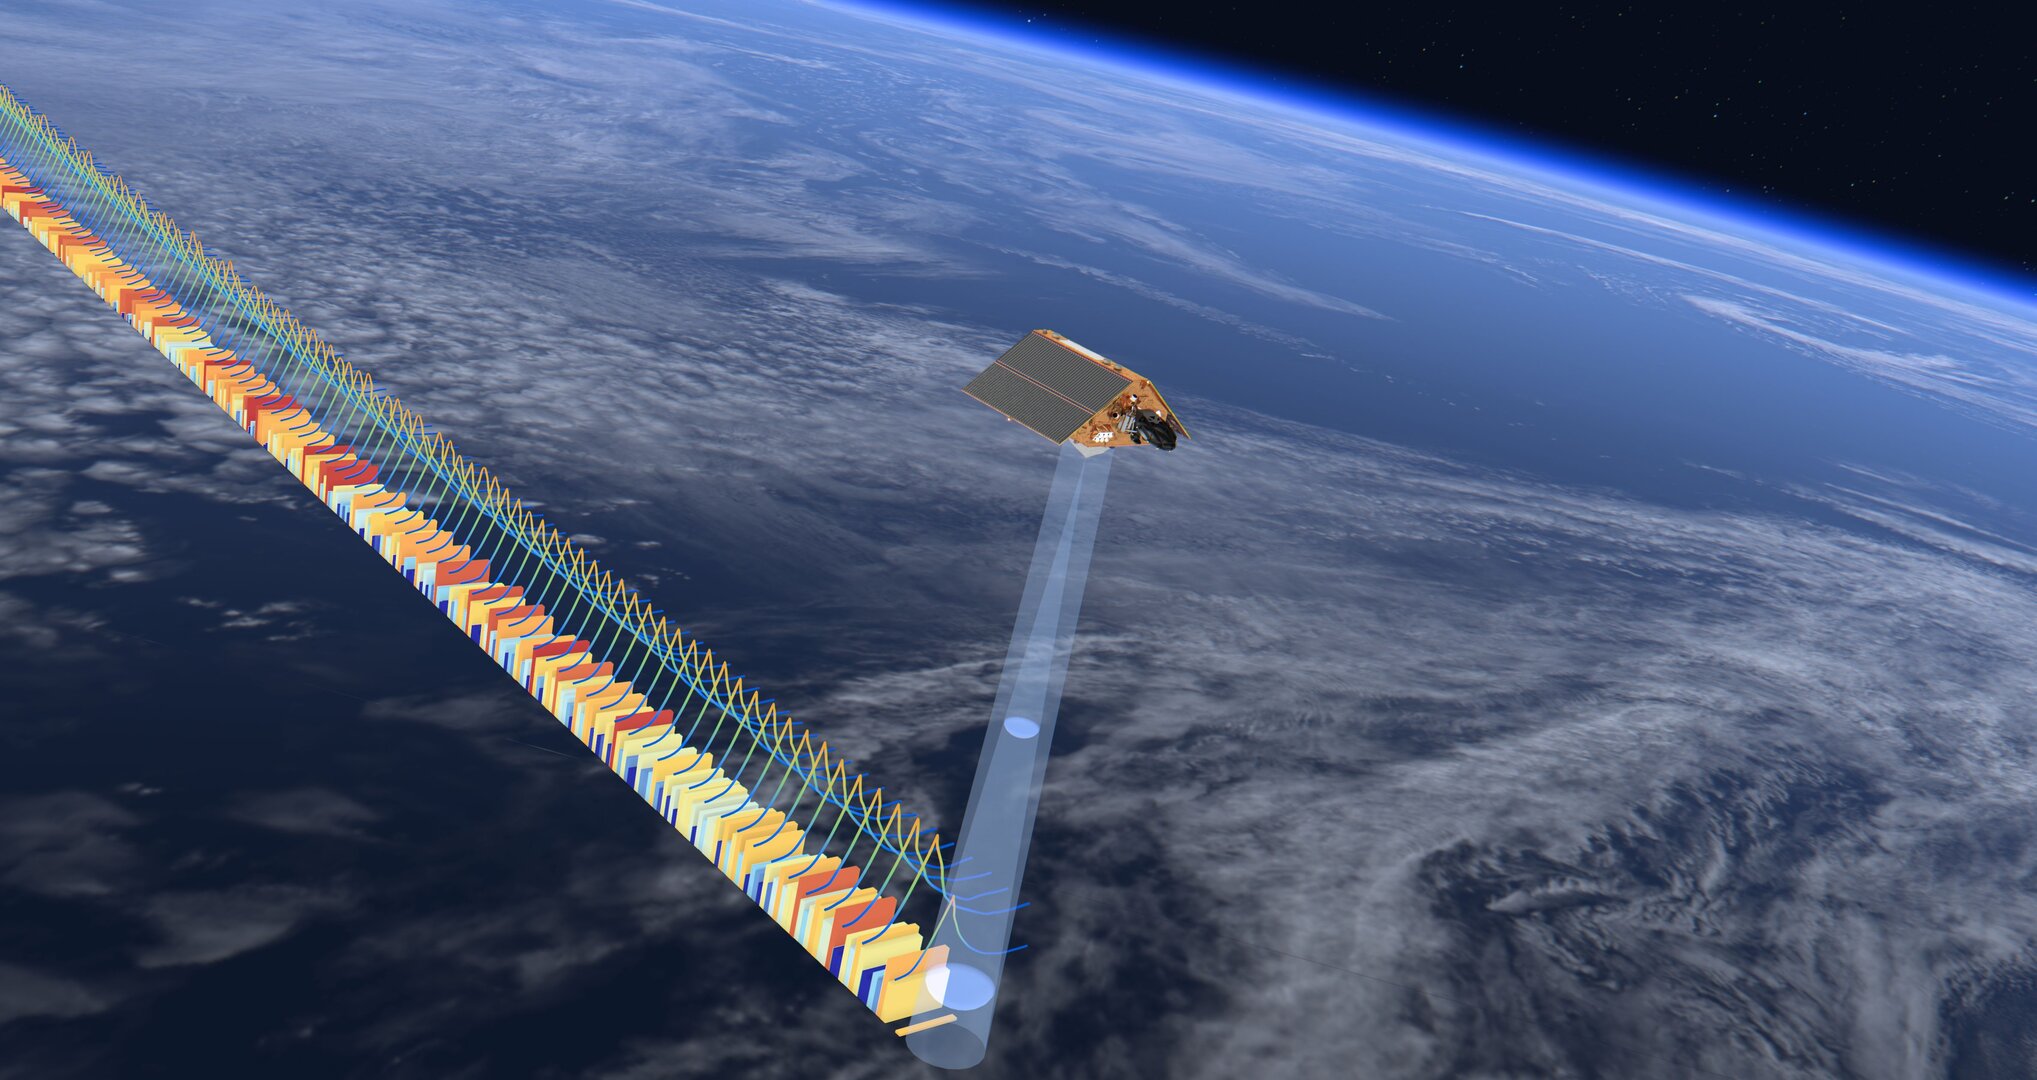 Satellites such as Sentinel 6 Michael Freilich carry advanced altimeters that allow it to make more accurate measurements of global sea level than its predecessors.